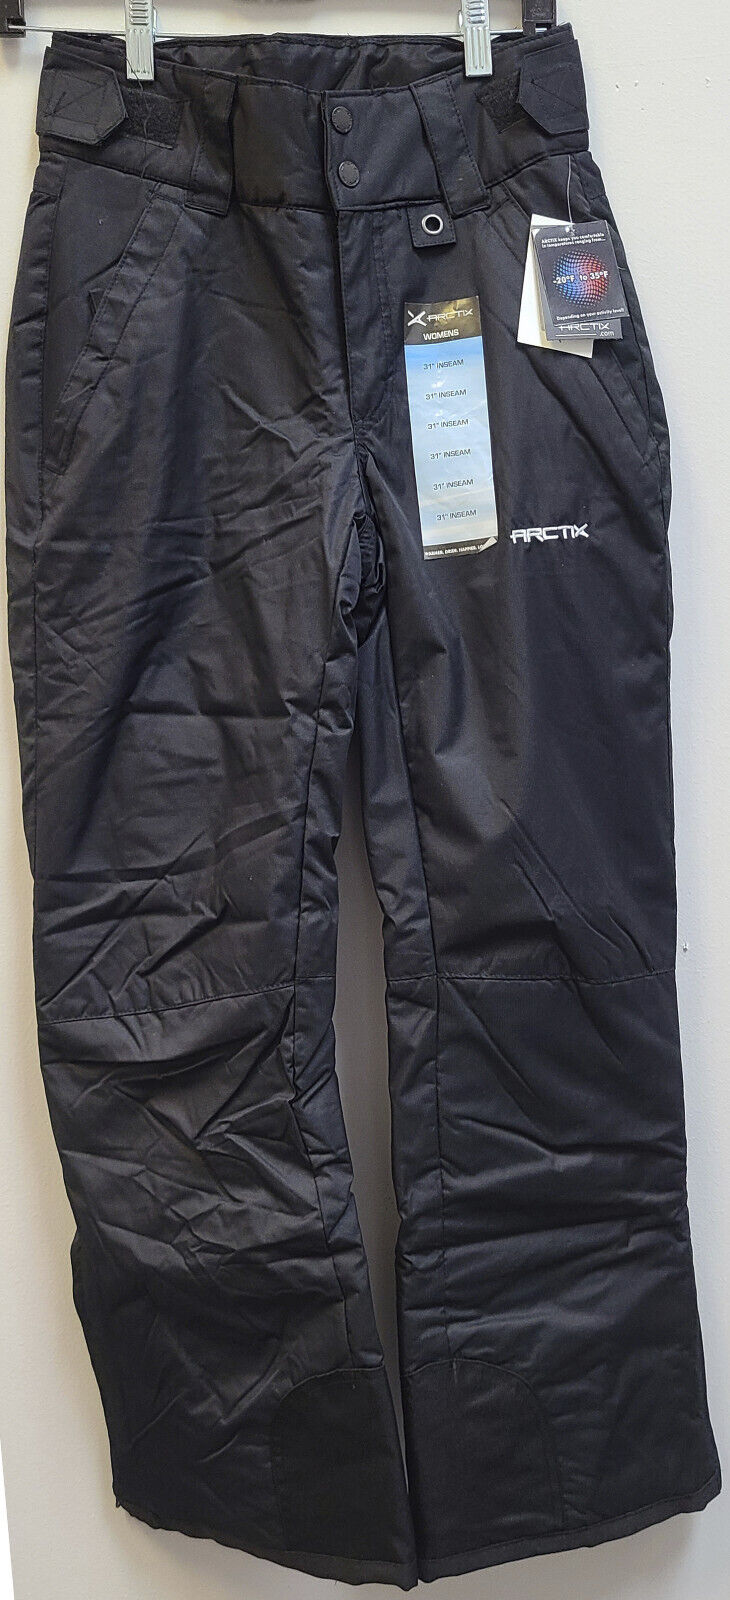 ARCTIX Women's INSULATED SNOW PANTS Size XS 0-2 Inseam 31 Protects -20F to  35F – Caleb's Treasures